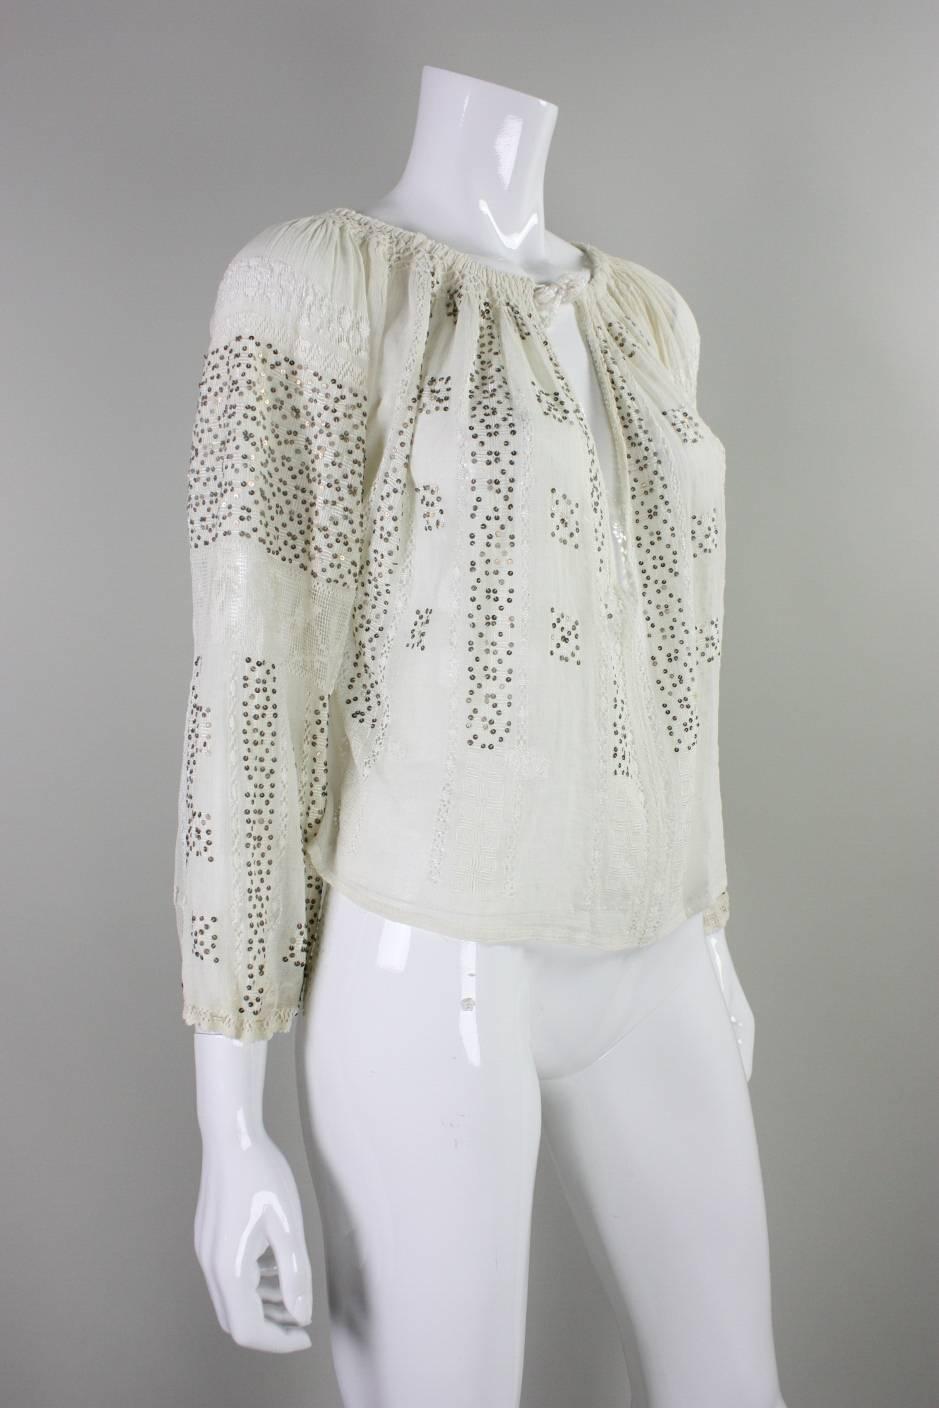 Vintage Eastern European blouse dates to the 1930's and is made of cream colored cotton gauze with openwork and metallic sequins. It features a keyhole neckline with a center front neck drawstring tie.  Long sleeves with drawstring cuffs. 